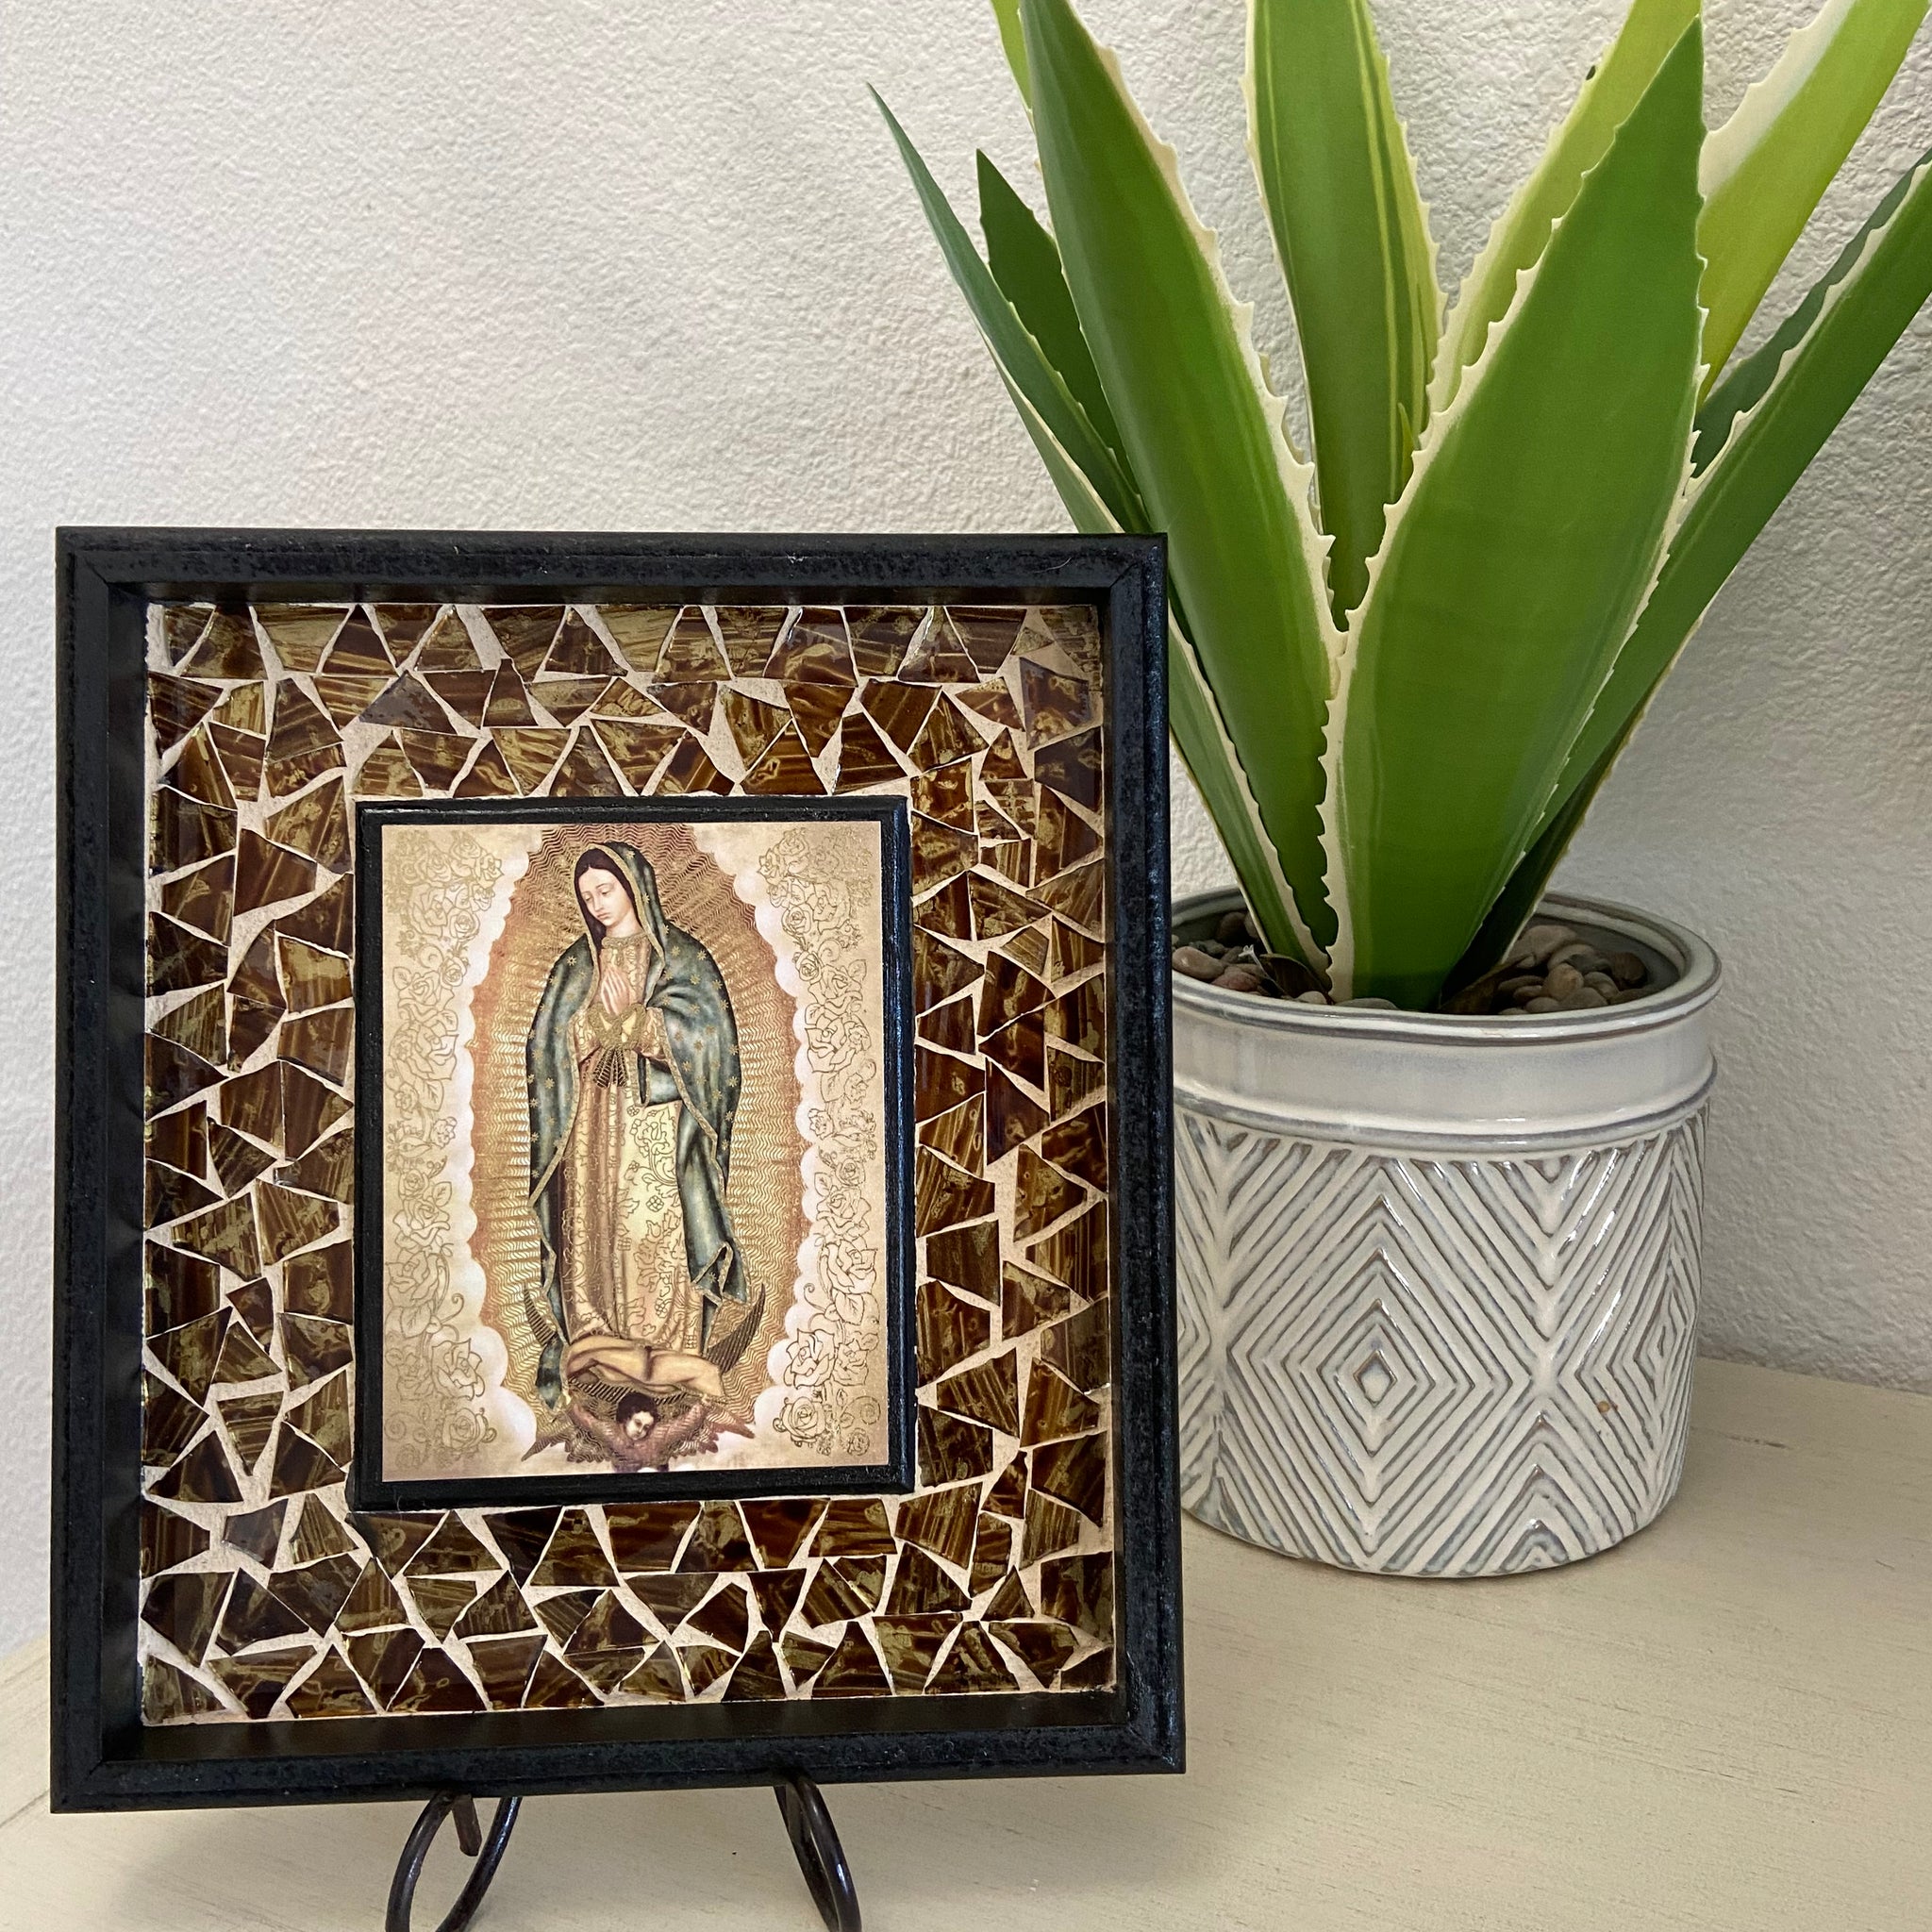 Our Lady Of Guadalupe Feast Day December 12